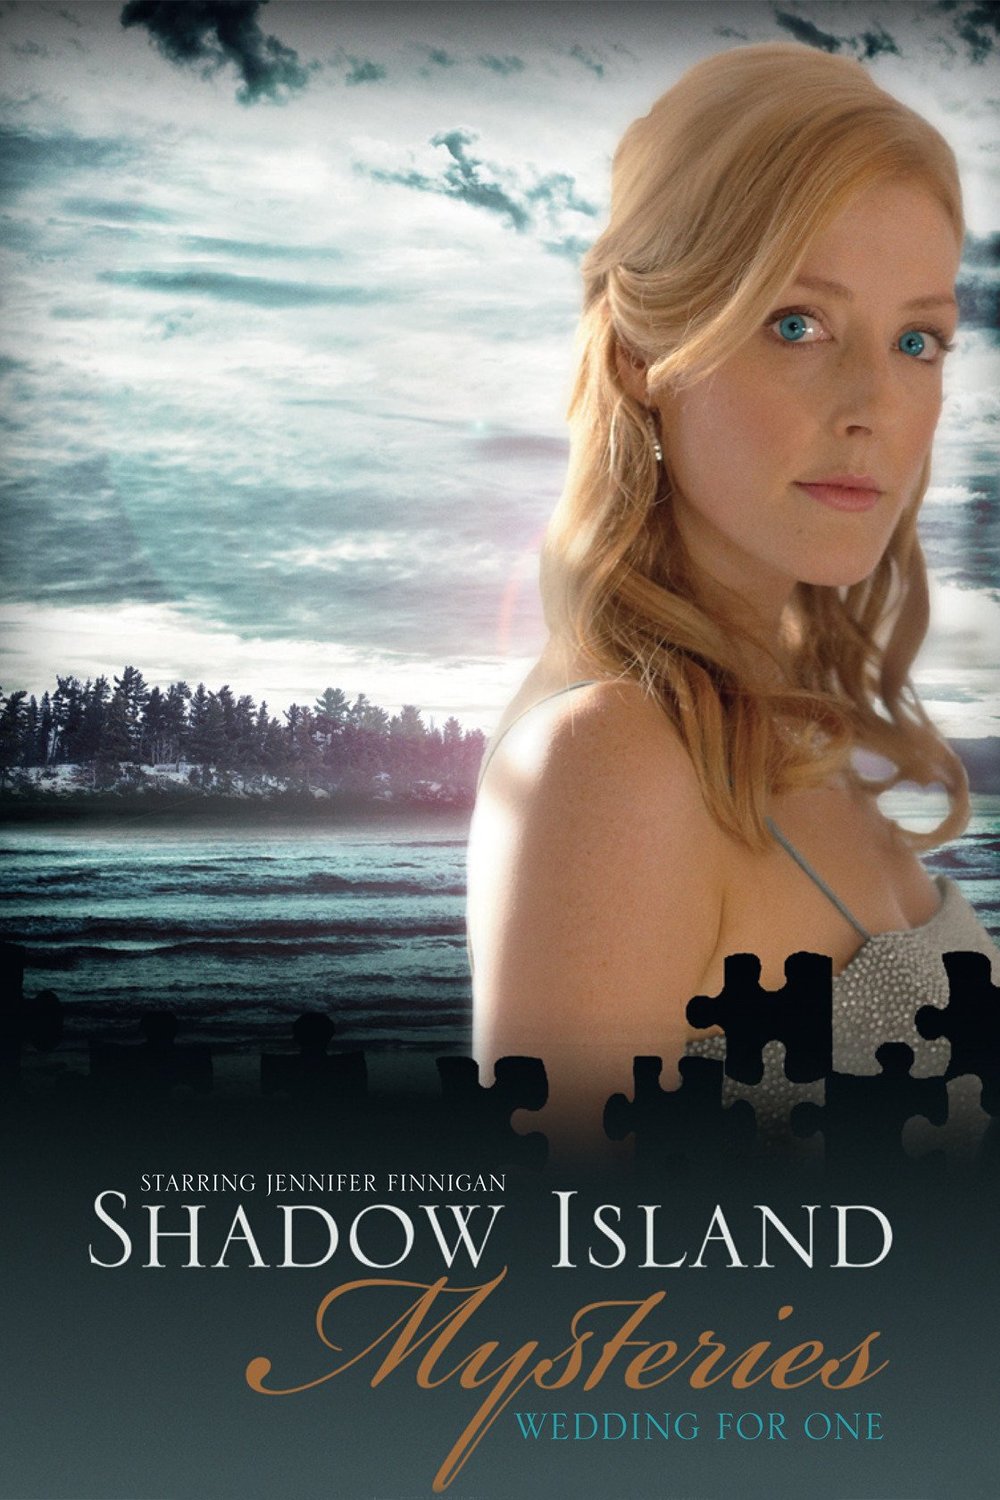 Poster of the movie Shadow Island Mysteries: Wedding for One